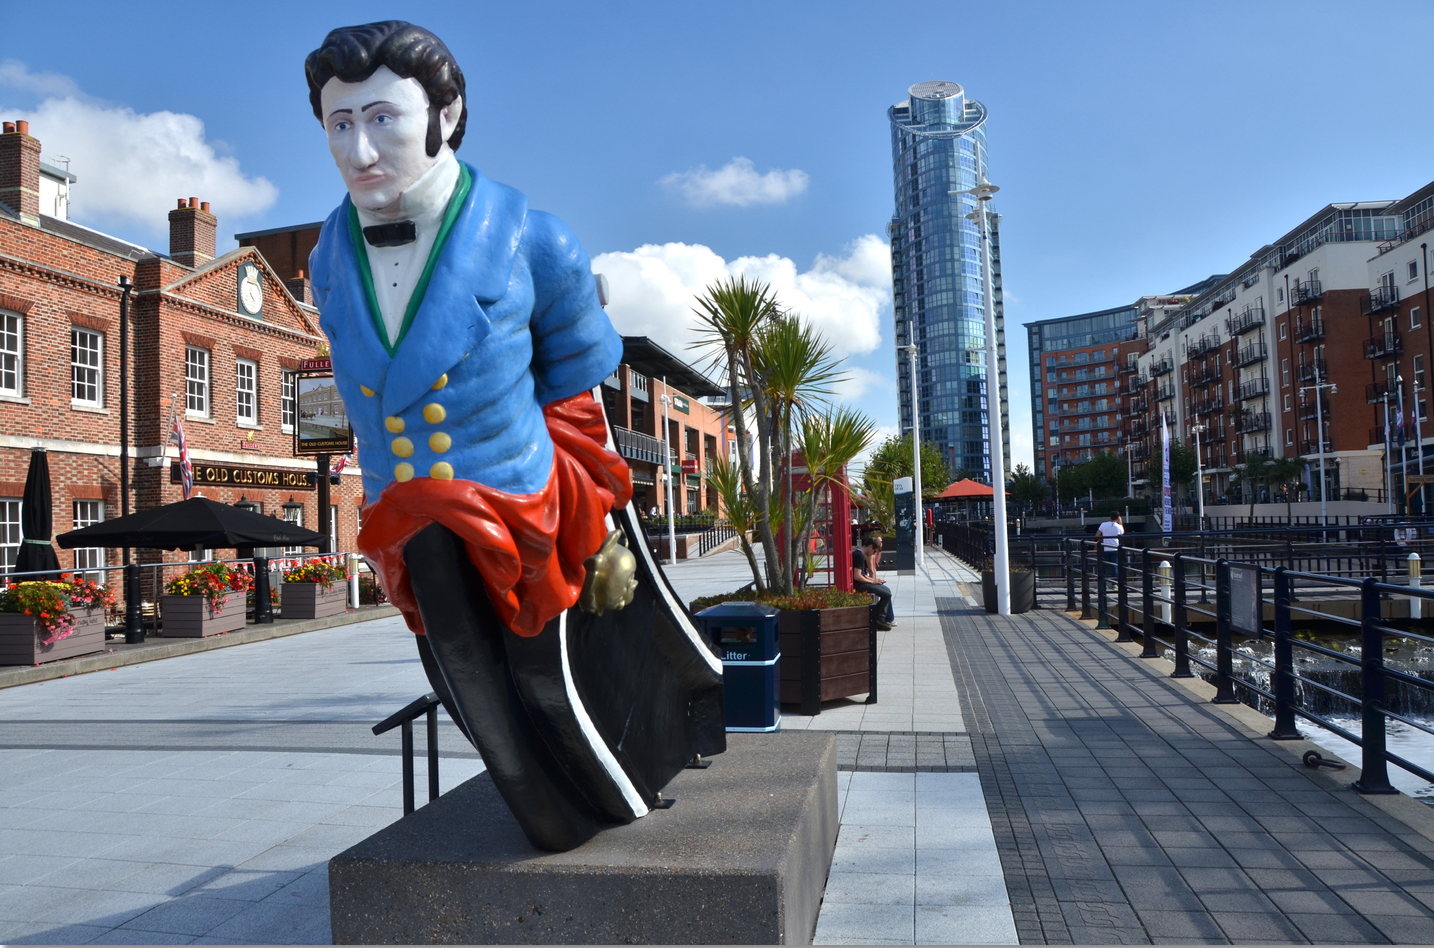 Figurehead depicting the Hon George Vernon from the fourth HMS Vernon, at Gunwharf Quays (formerly HMS VERNON)